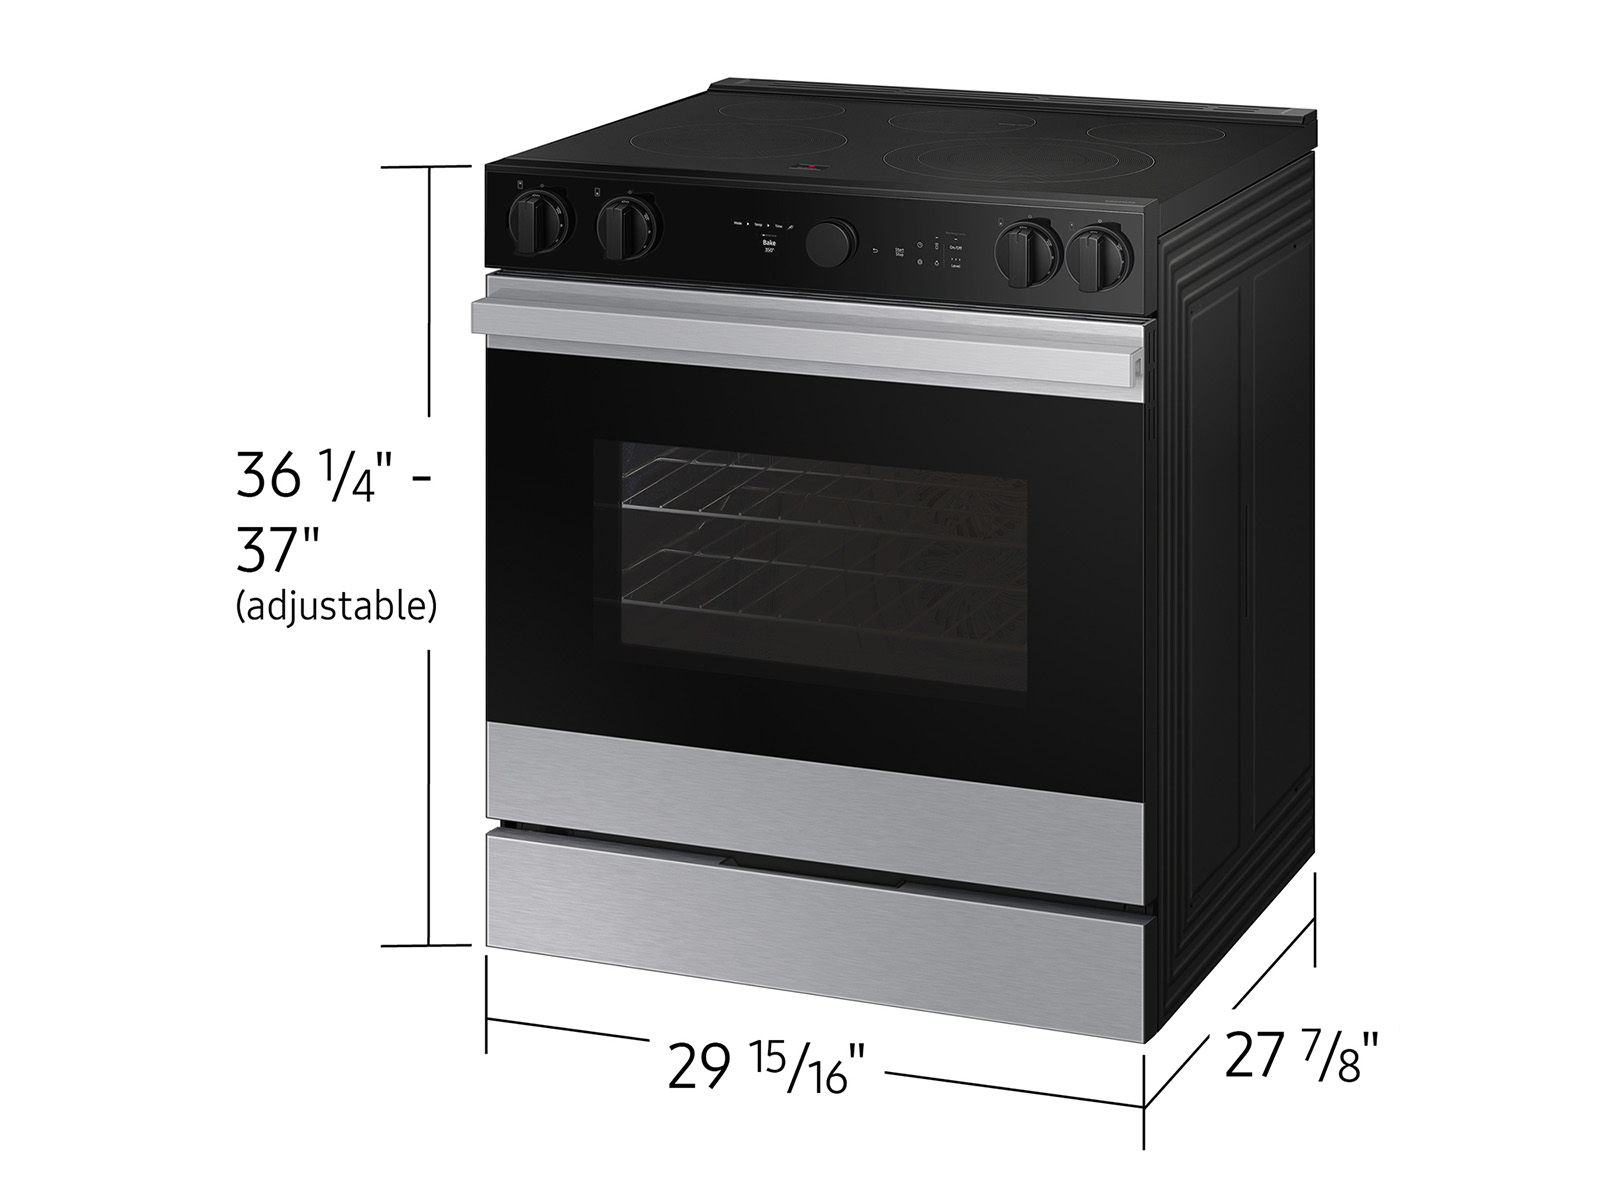 Thumbnail image of Bespoke 6.3 cu. ft. Smart Slide-In Electric Range with Smart Oven Camera & Illuminated Precision Knobs in Stainless Steel